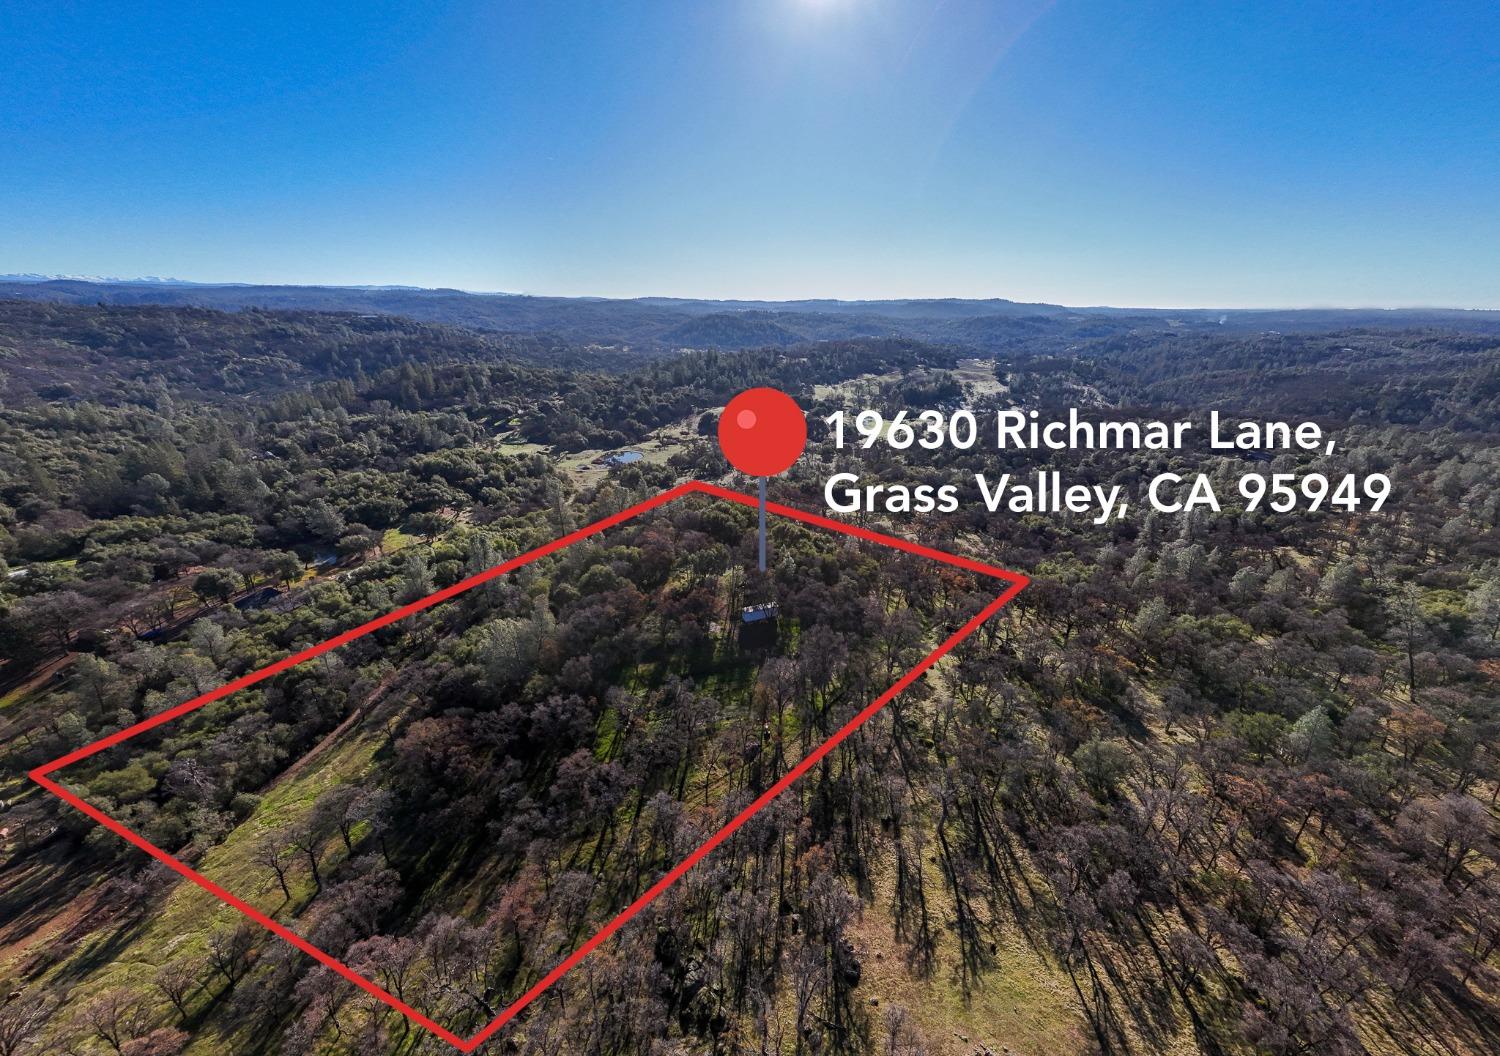 Photo of 19630 Richmar Ln in Grass Valley, CA